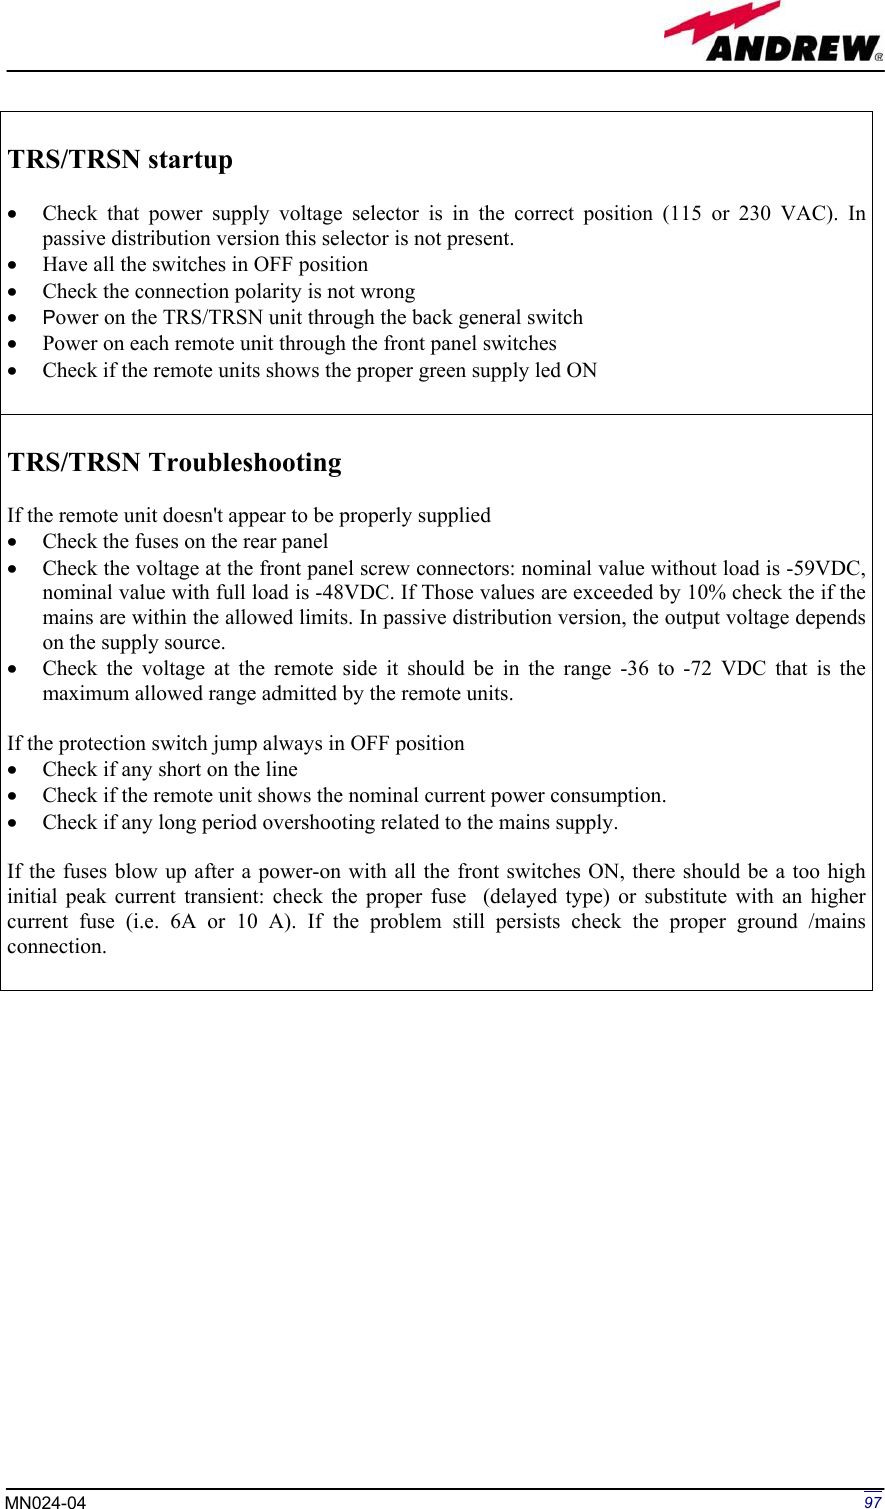 Page 97 of Andrew Wireless Innovations Group BCP-TFAM23 Model TFAM23 Downlink Booster User Manual MN024 04 rev3